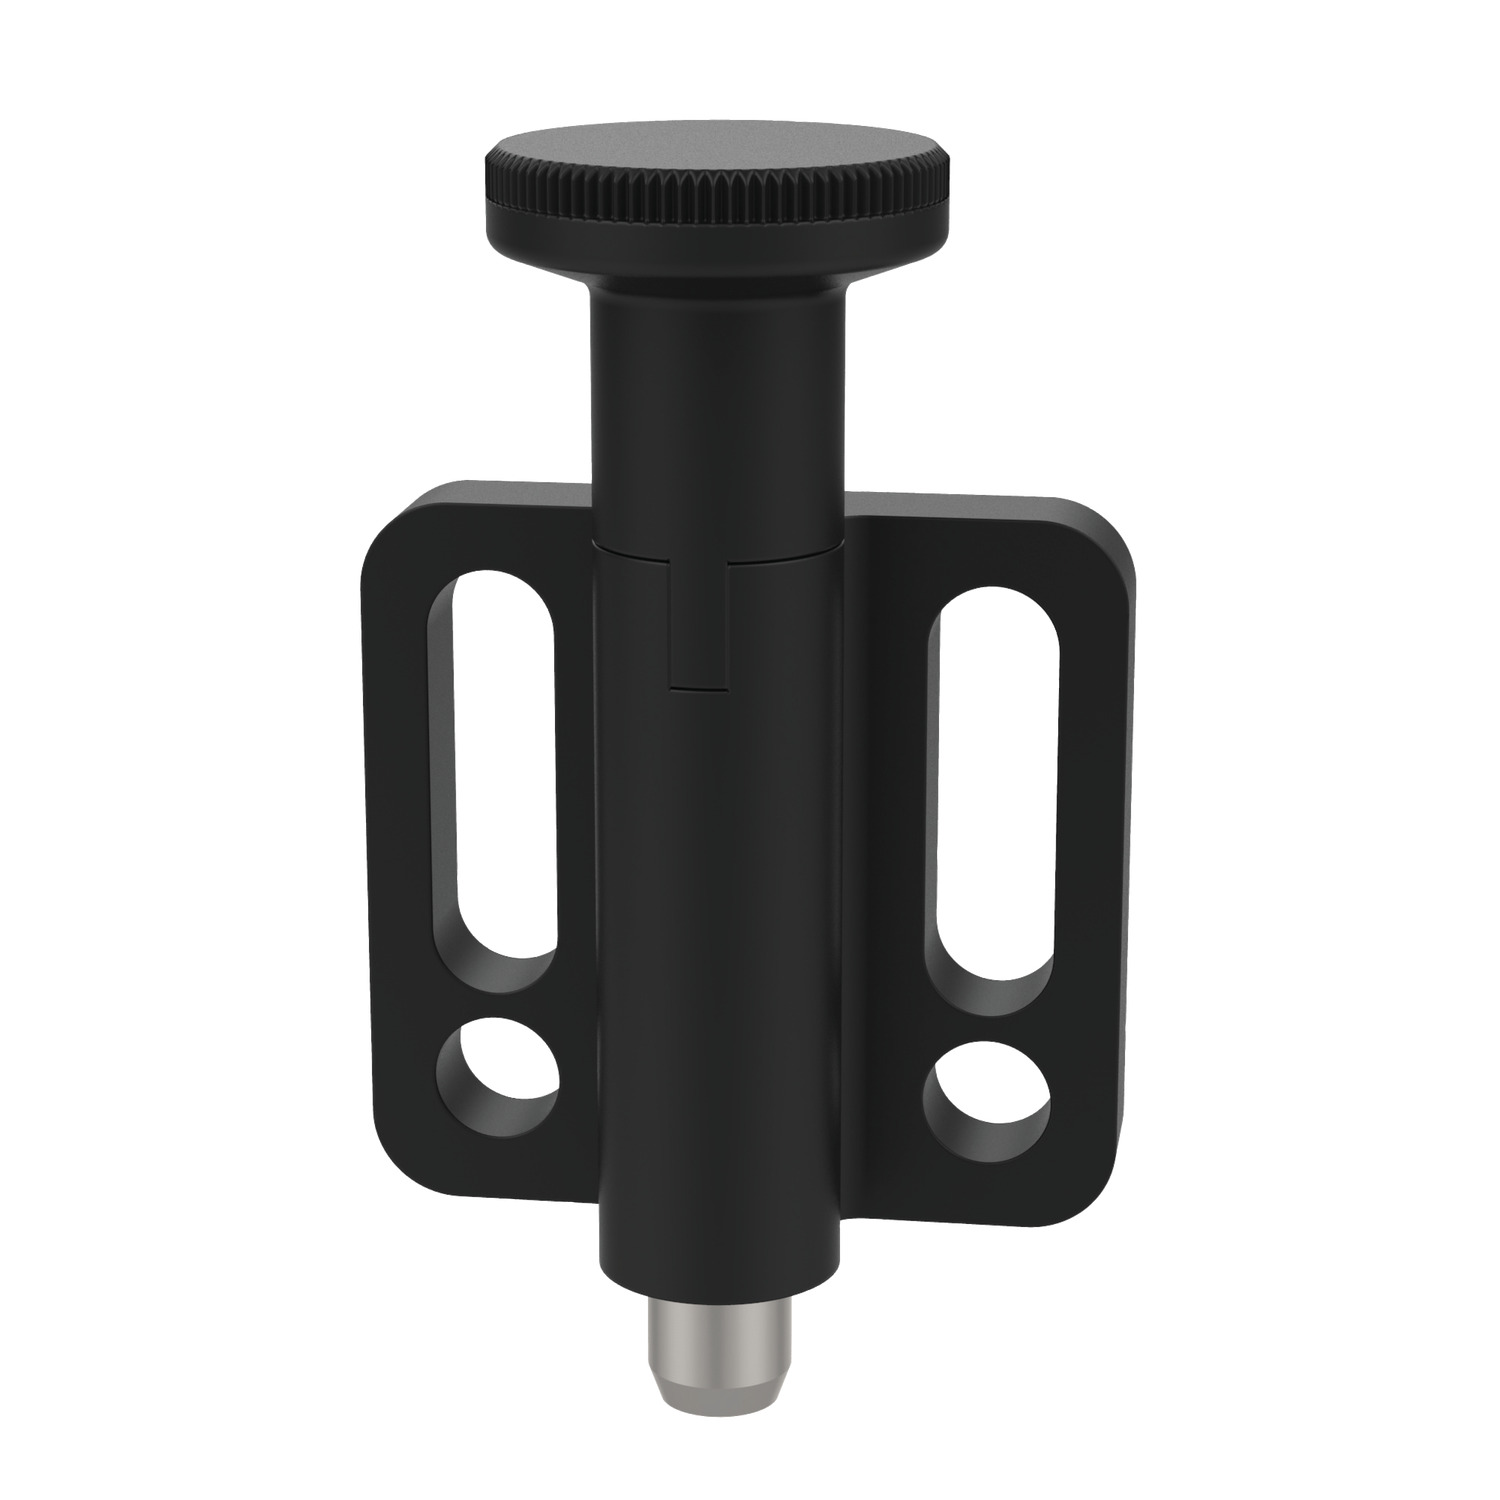 Index Plungers - Pull Grip Designed for locating on horizontal surfaces it comes in both locking and non-locking models.